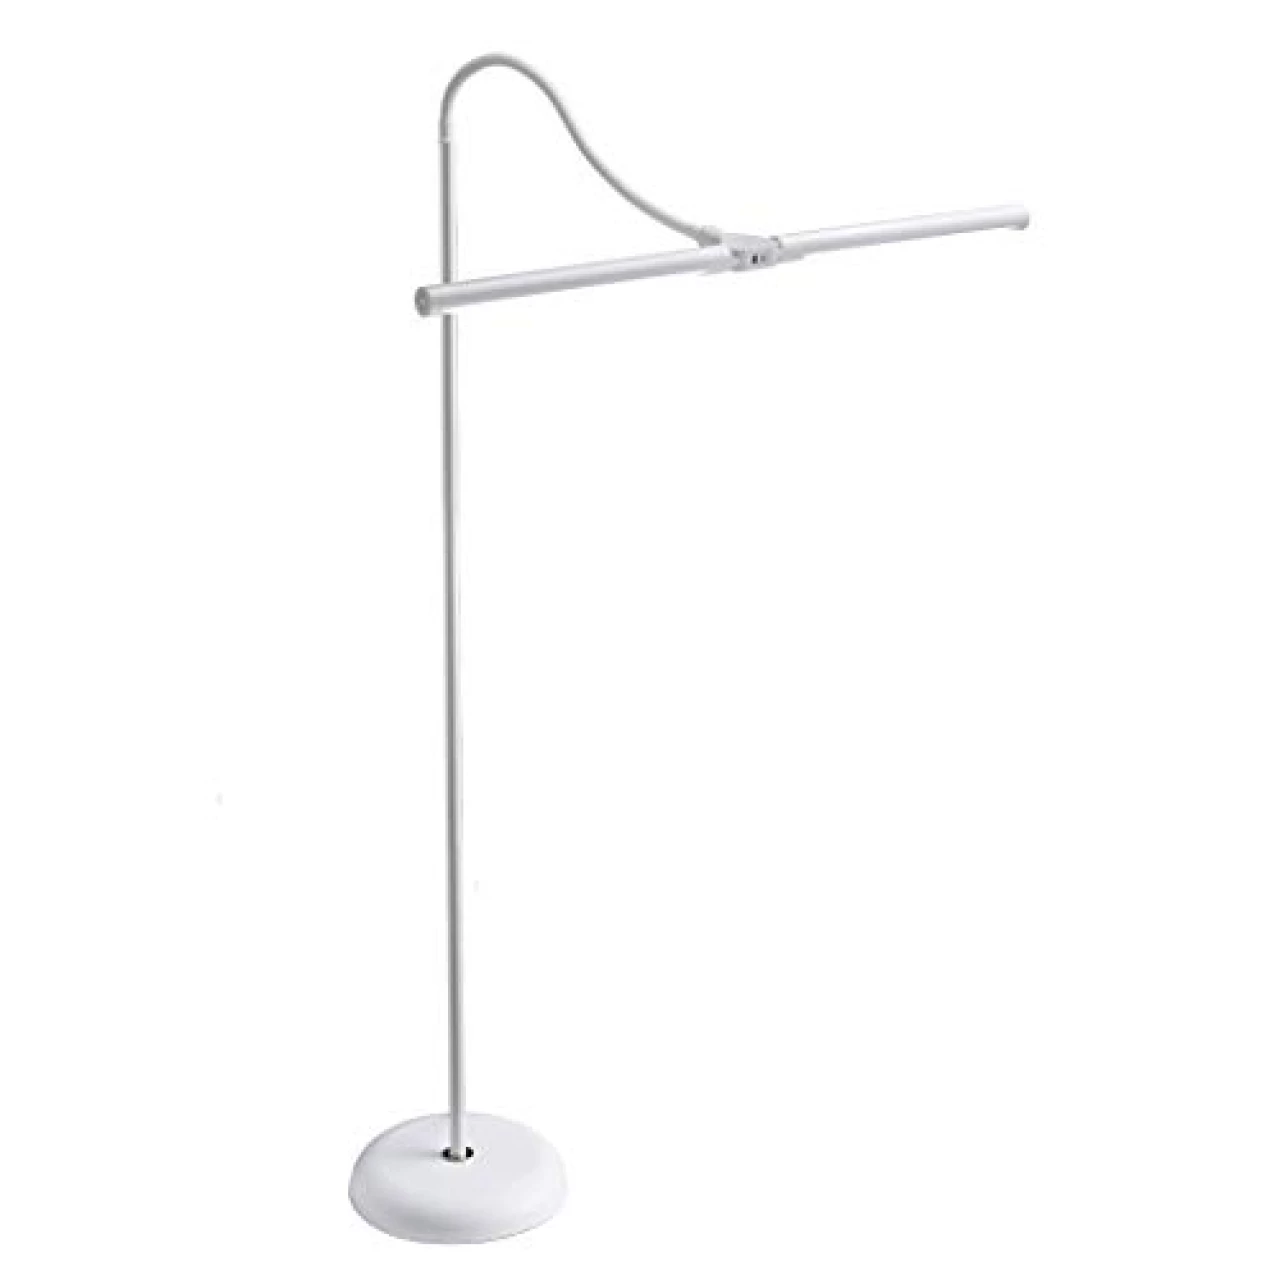 Daylight Company Duolamp, Floor Lamp, Standing Lamp for Living Room, Bedroom, Salon, Office, Touch Control, Flexible Arm, Sleek Design, Multipurpose, Double Head, 4 Brightness Levels - White 10W